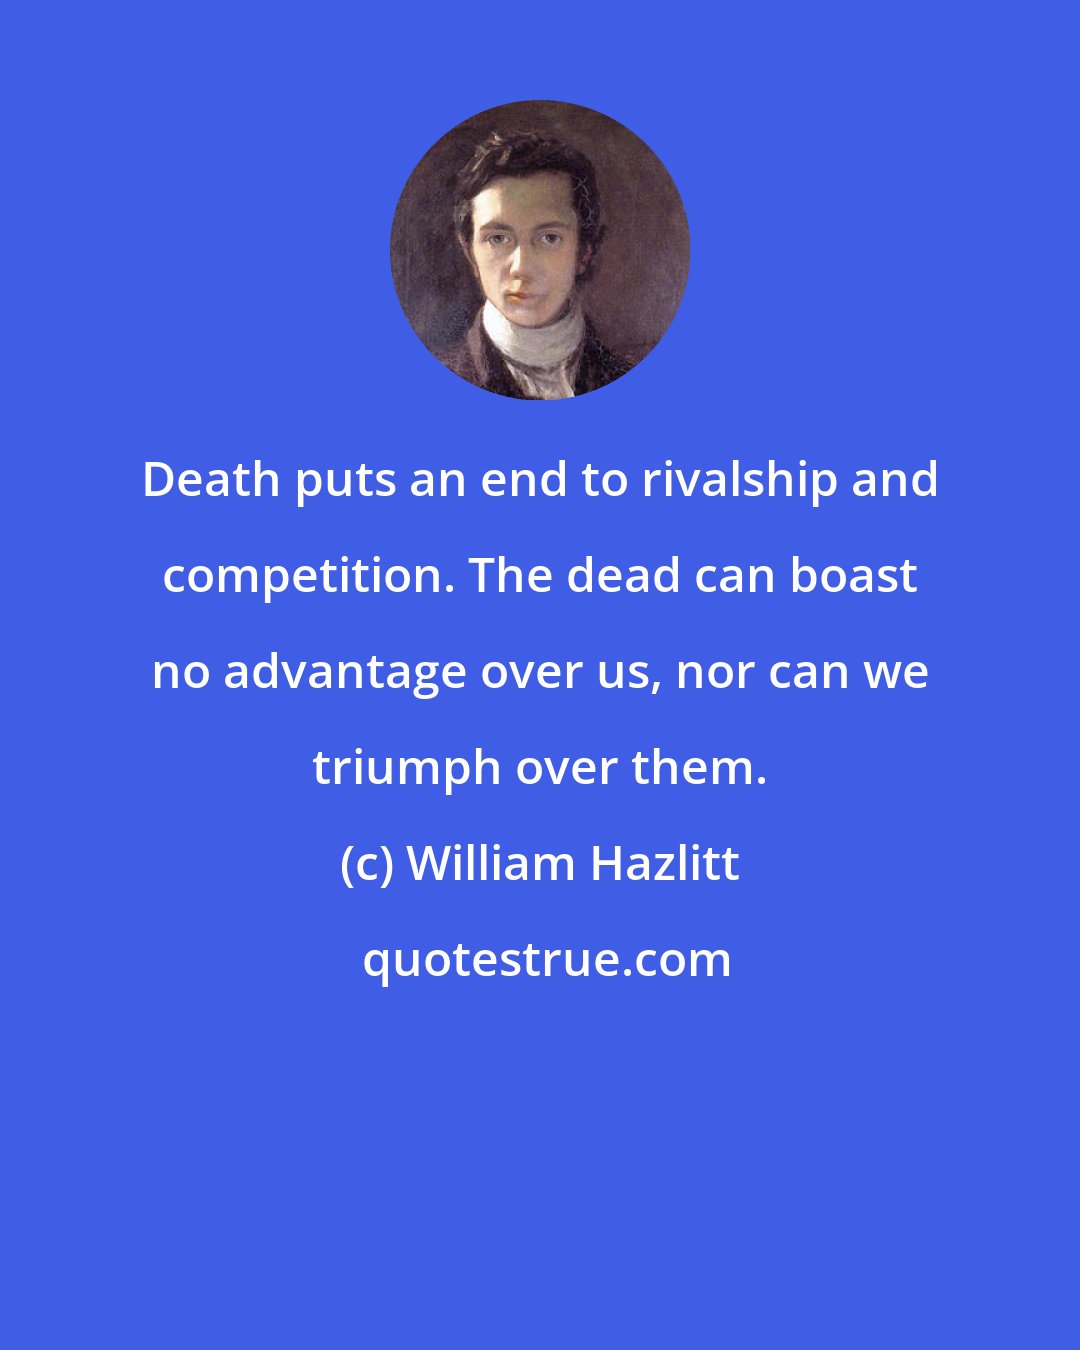 William Hazlitt: Death puts an end to rivalship and competition. The dead can boast no advantage over us, nor can we triumph over them.